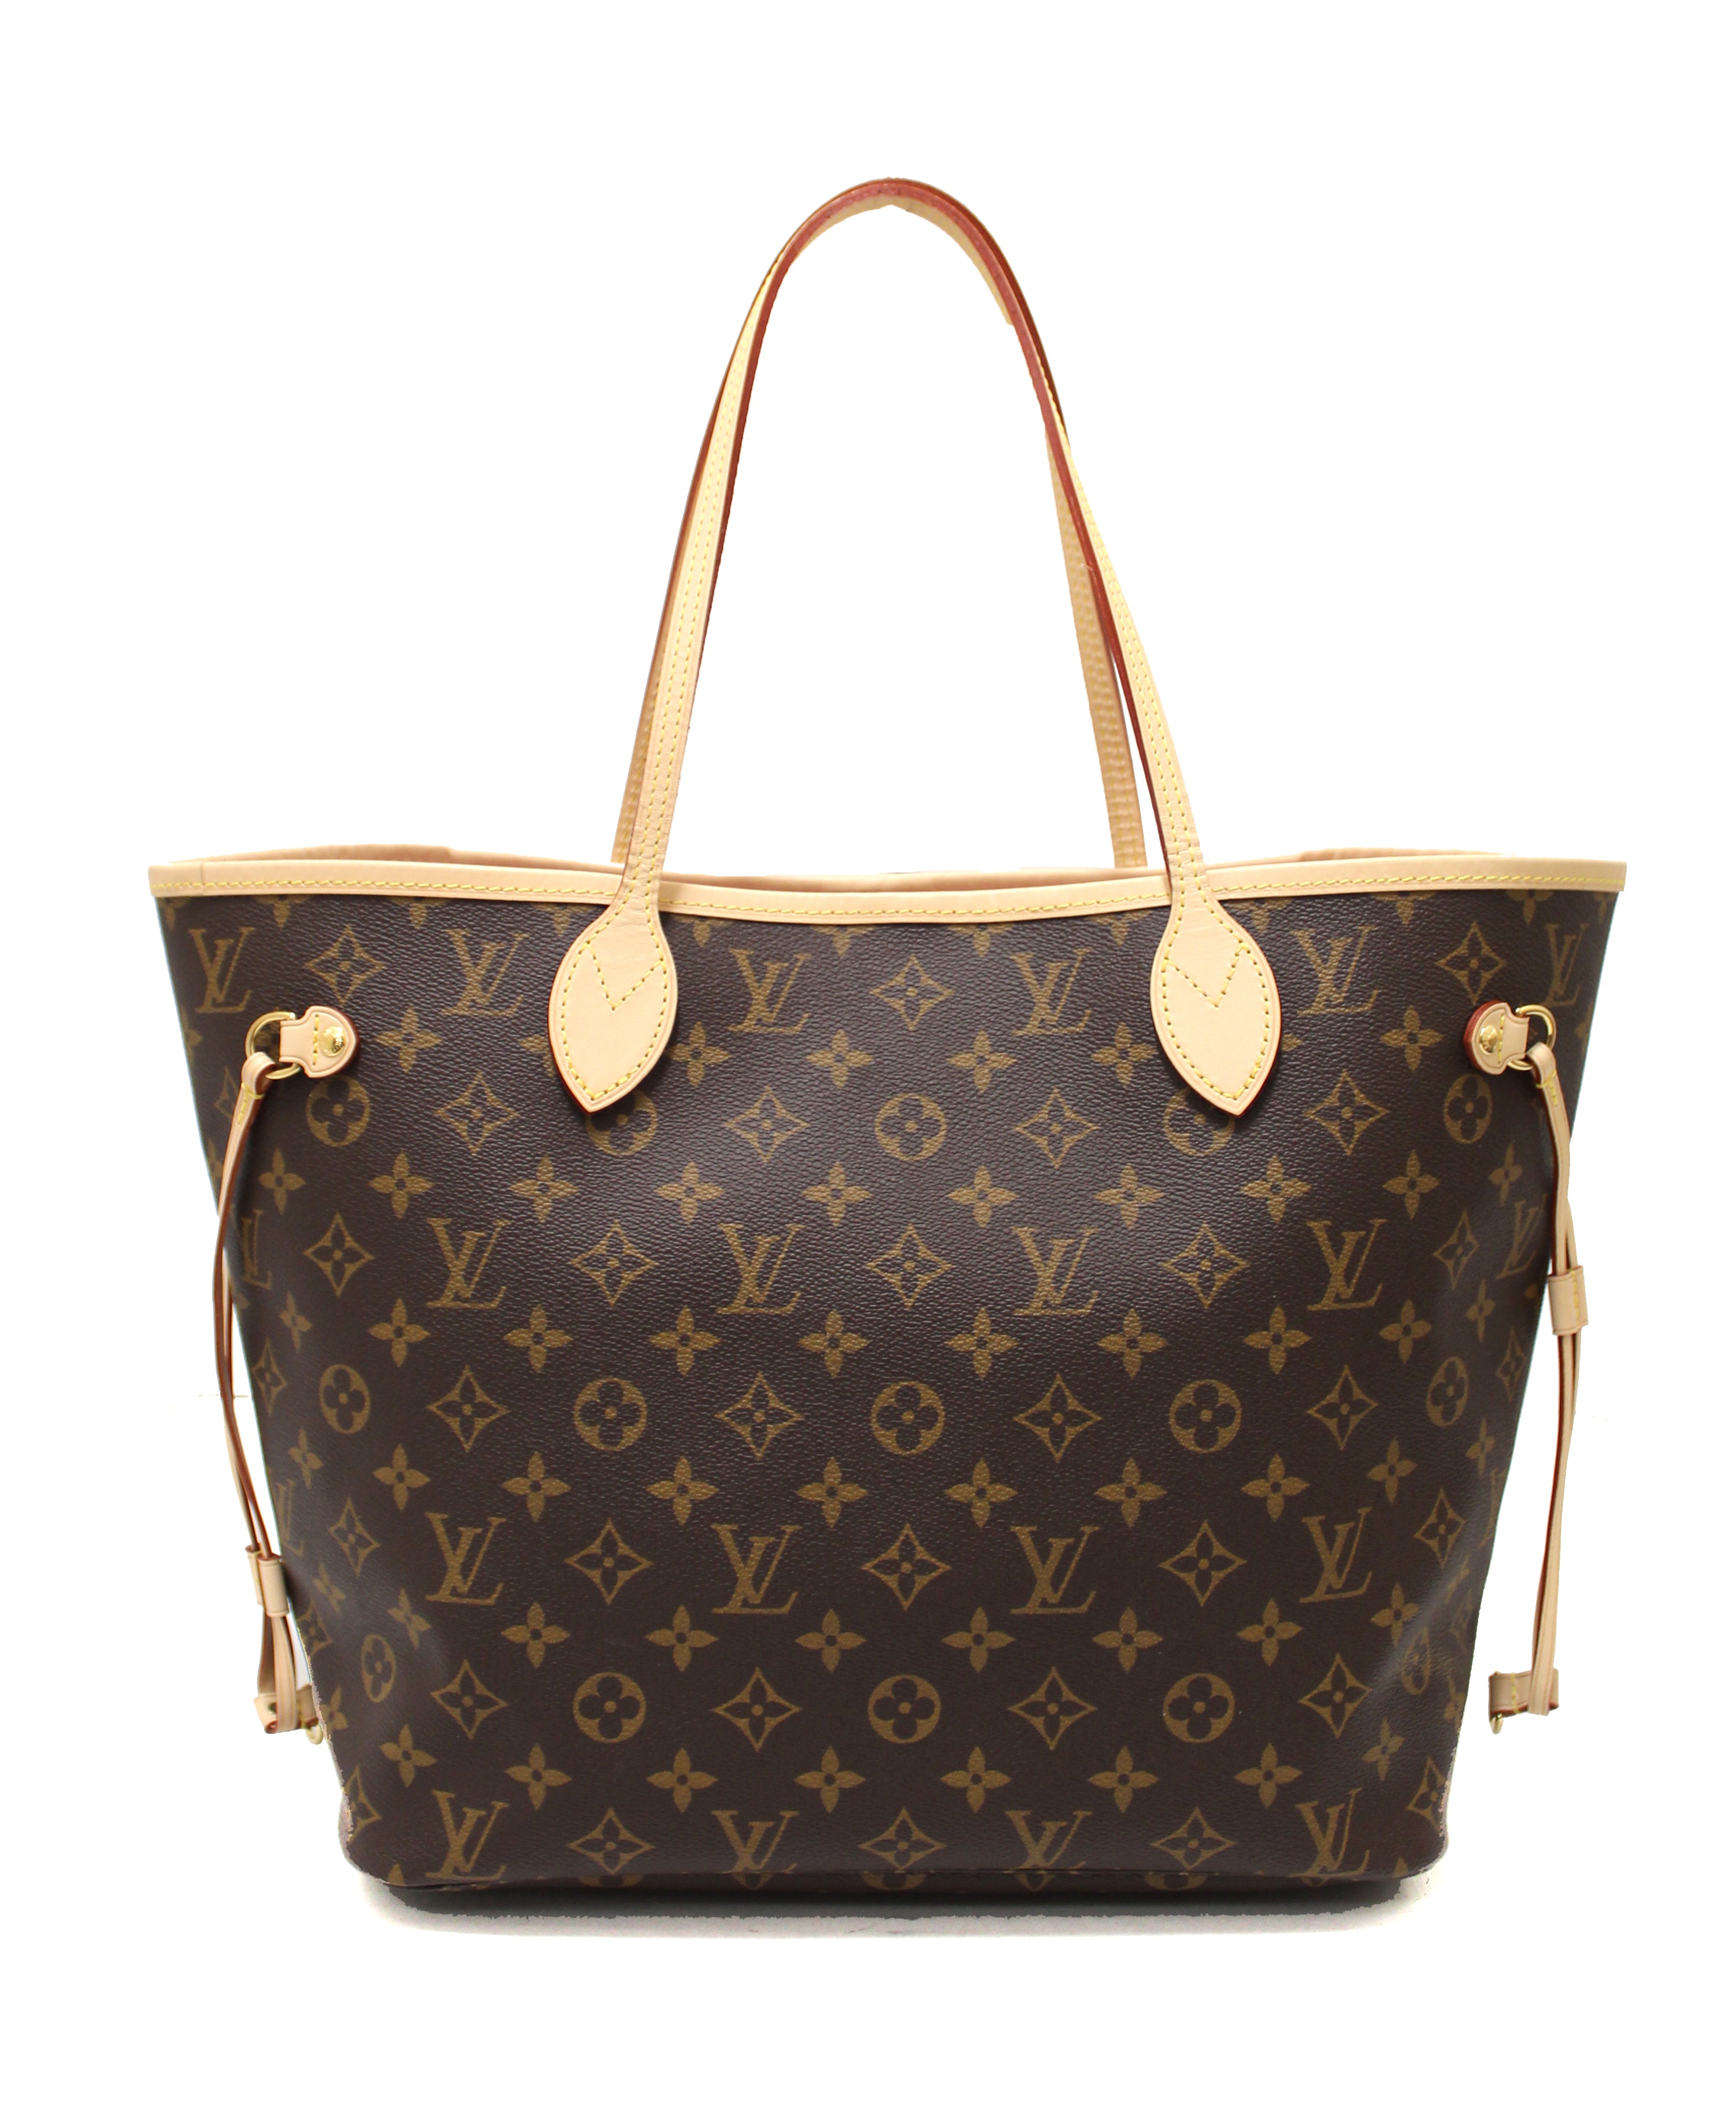 authentic lv neverfull